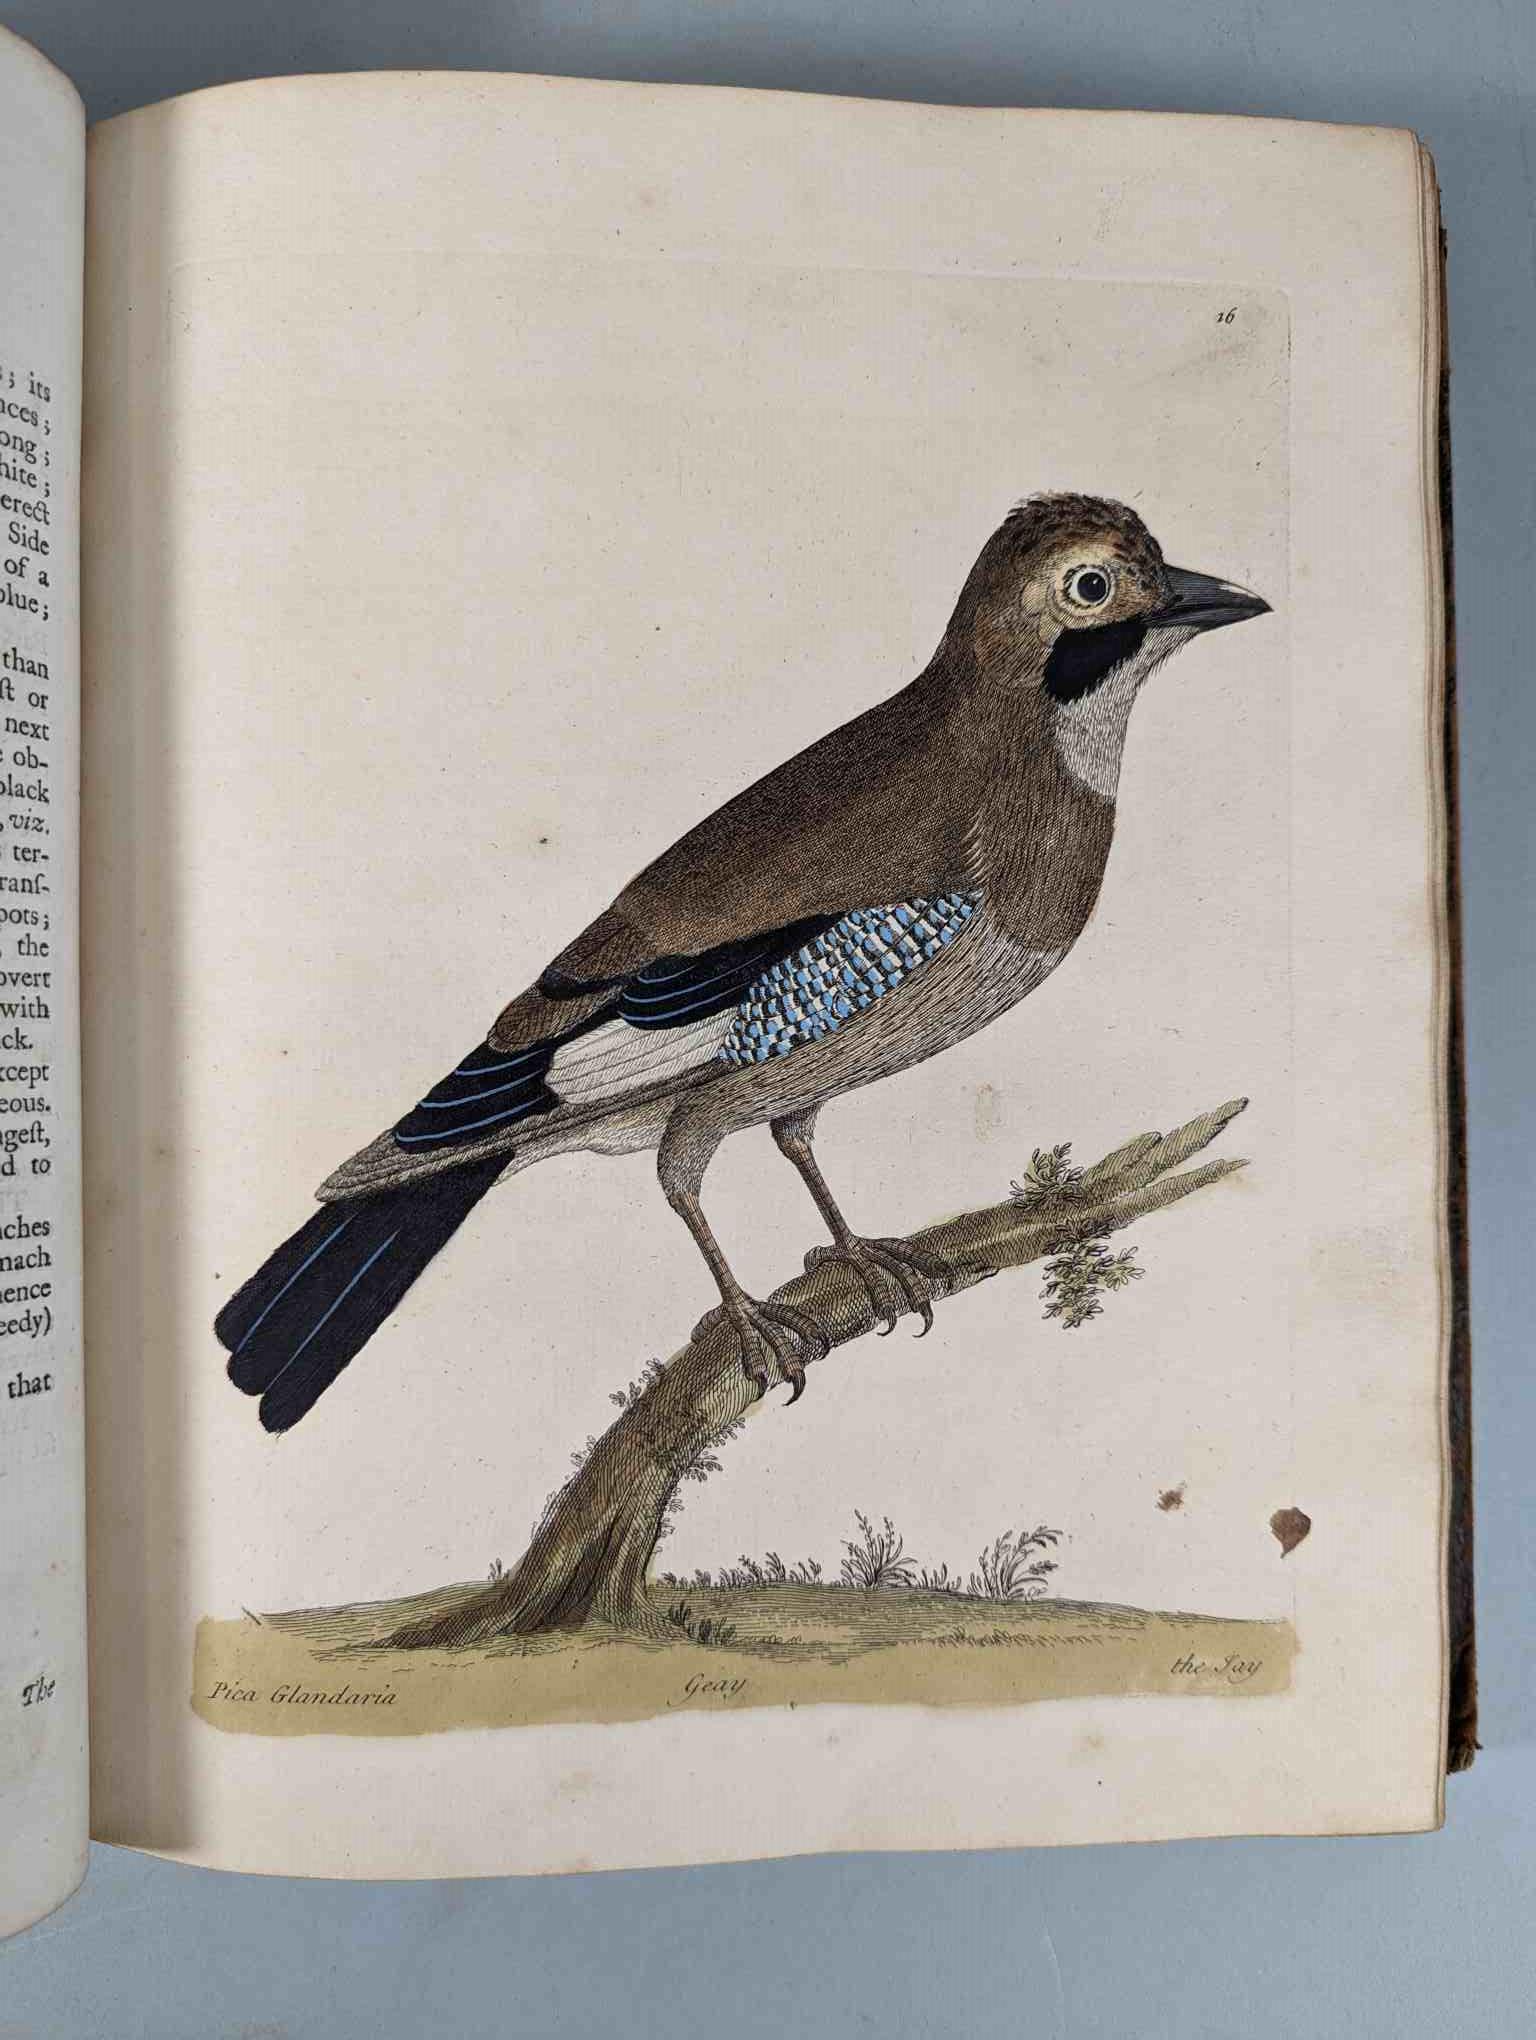 ALBIN, Eleazar. A Natural History of Birds, to which are added, Notes and Observations by W. - Image 19 of 208